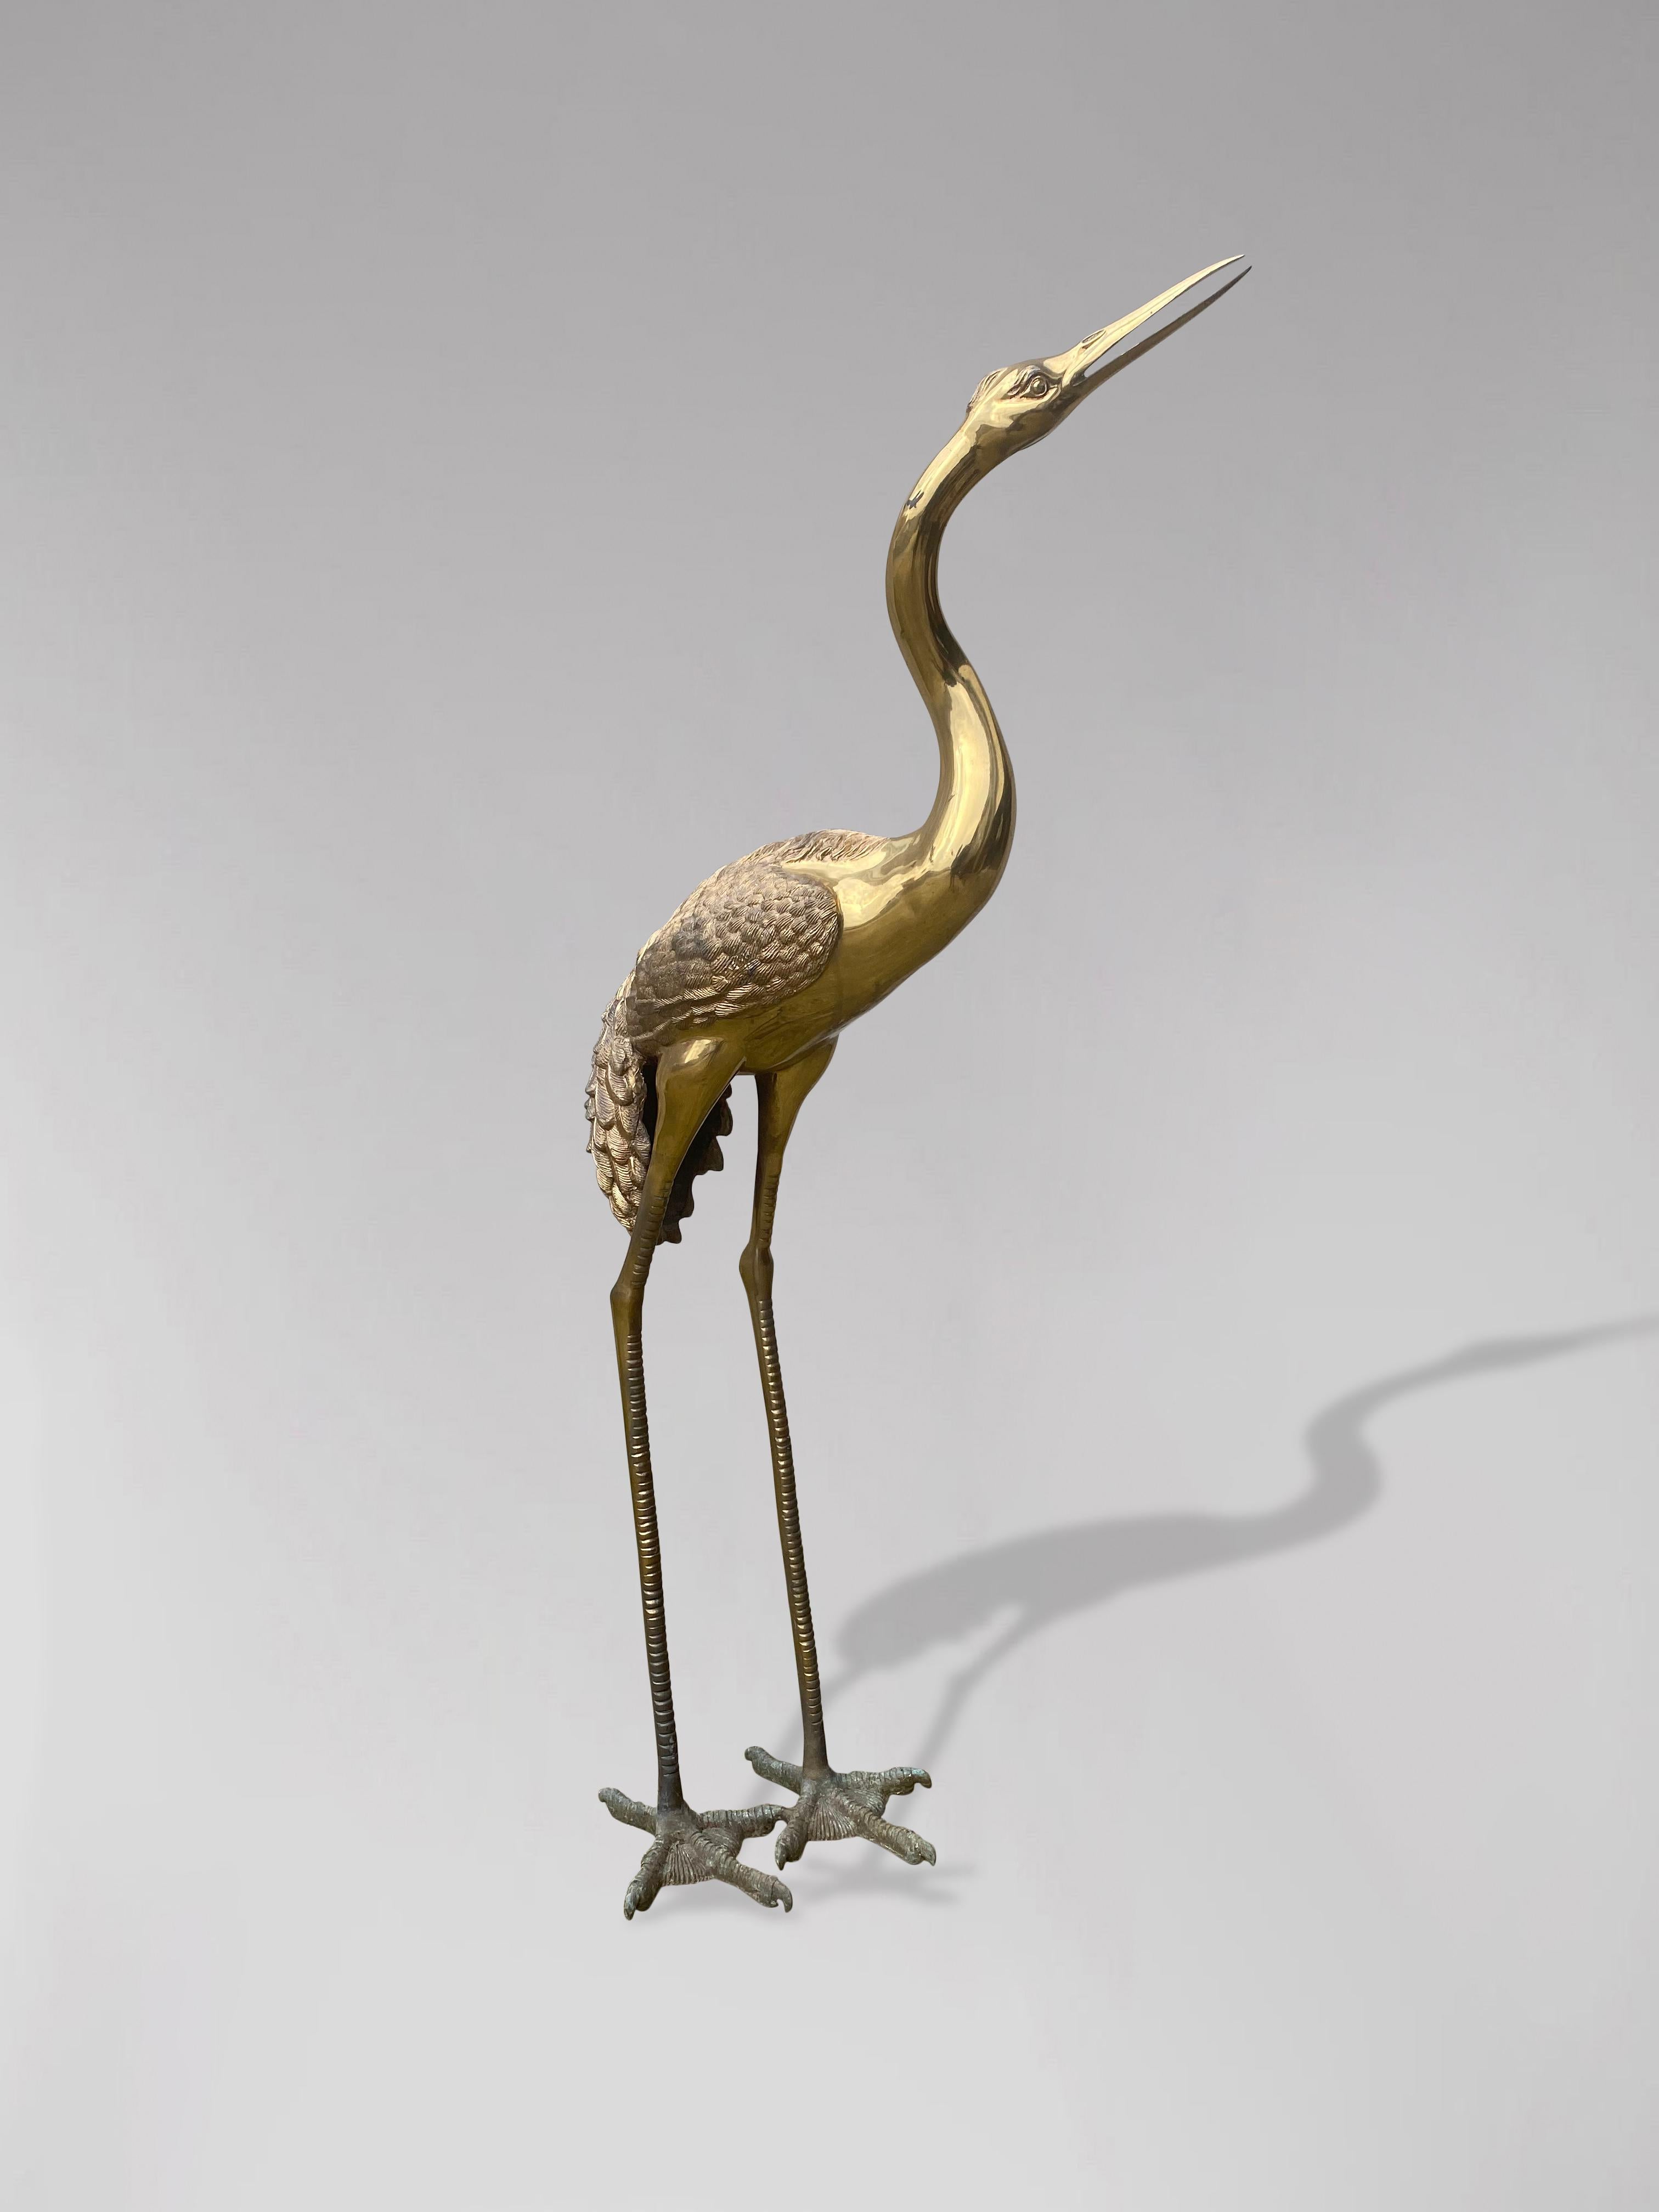 1960s Life Size Free Standing Solid Brass Heron Sculpture In Good Condition In Petworth,West Sussex, GB